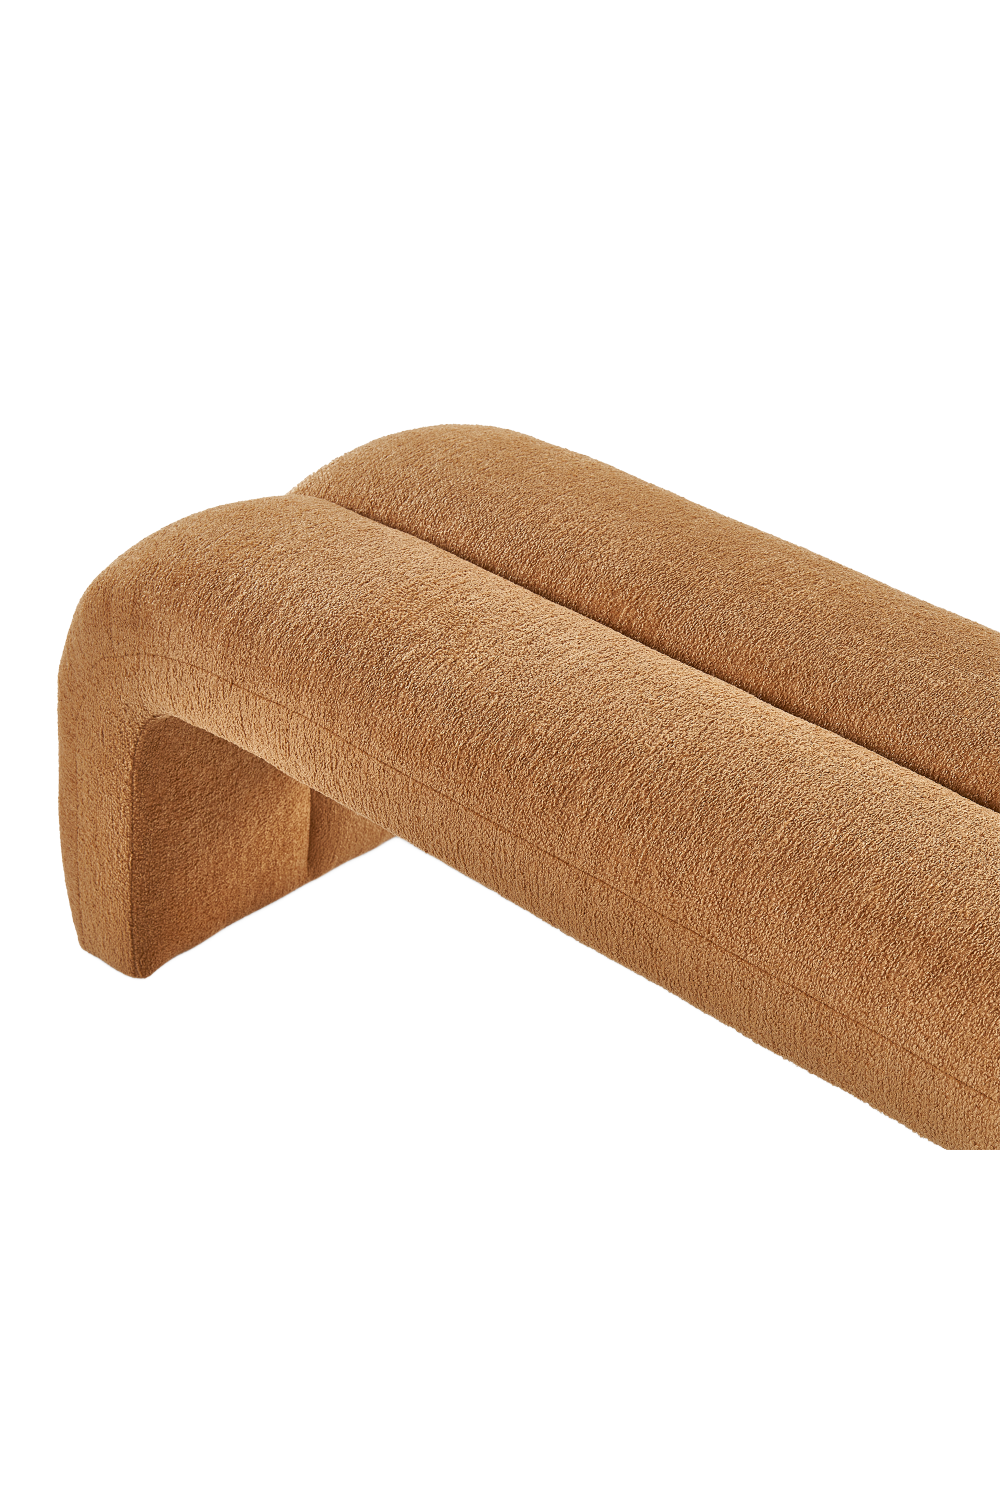 Upholstered Curved Bench | Liang & Eimil Piper | Oroa.com